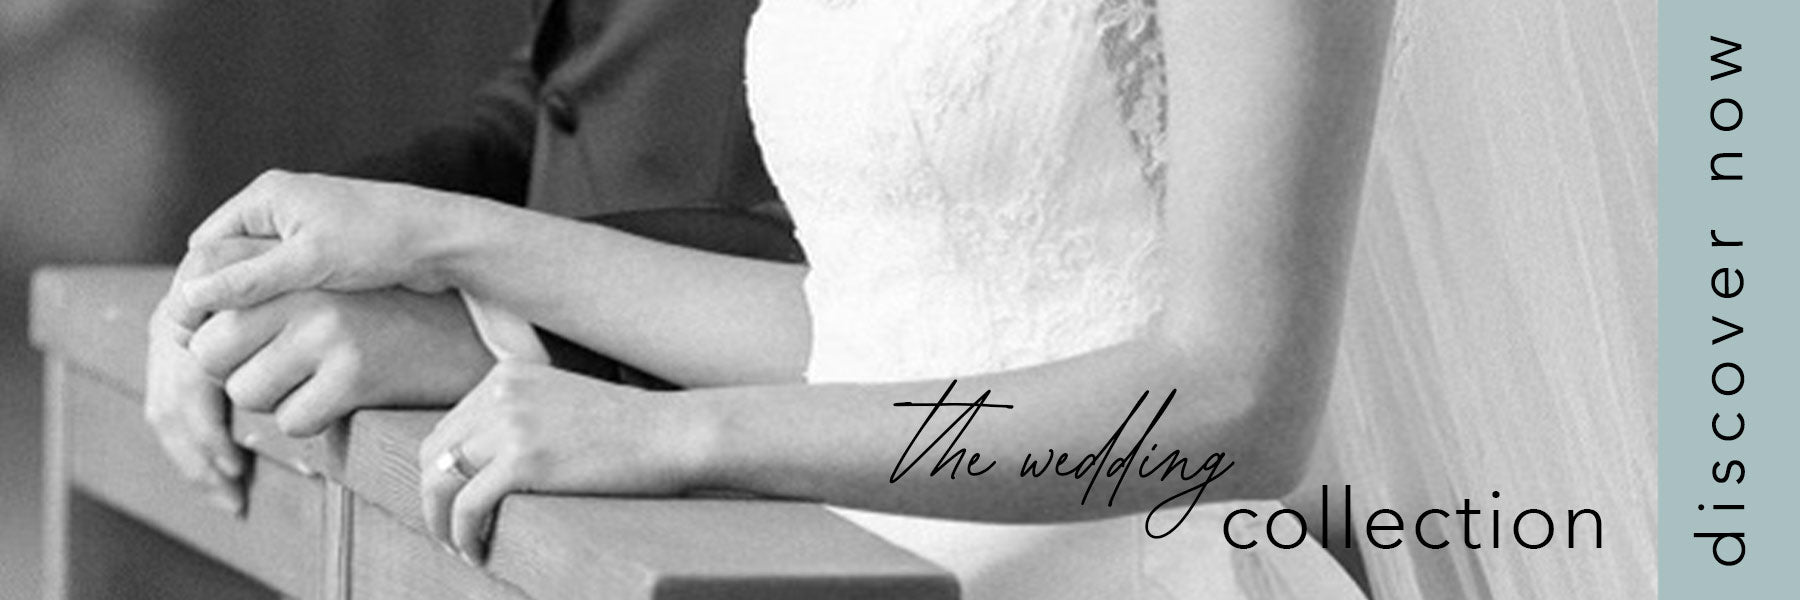 shop the wedding collection black and white photo of man and woman holding hands at the nuptial altar